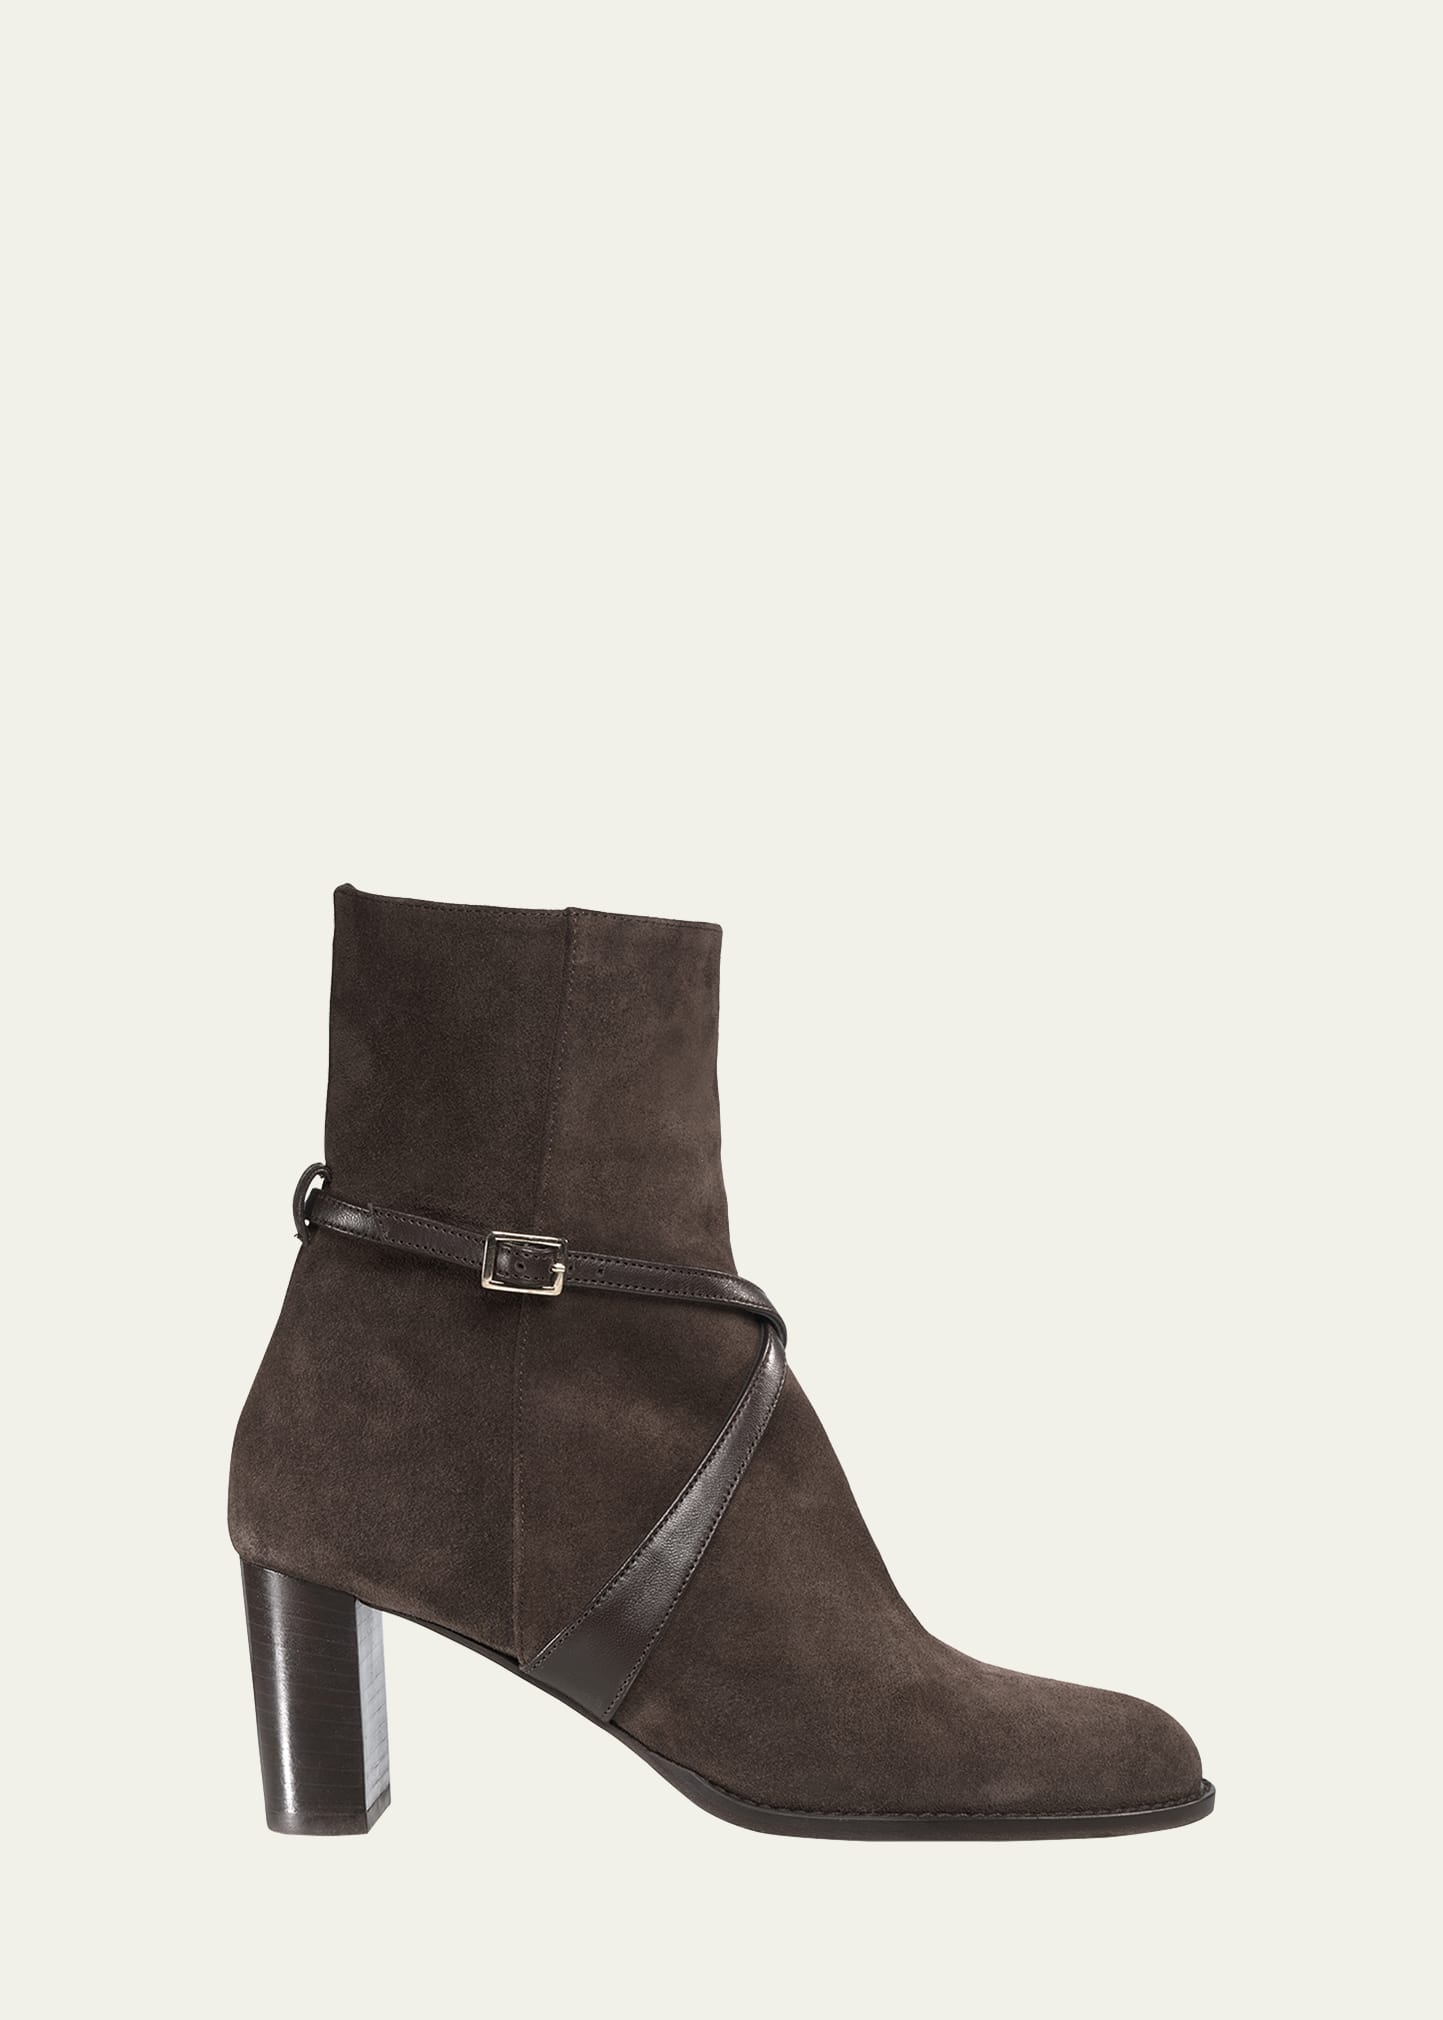 Selena Suede Ankle-Strap Booties